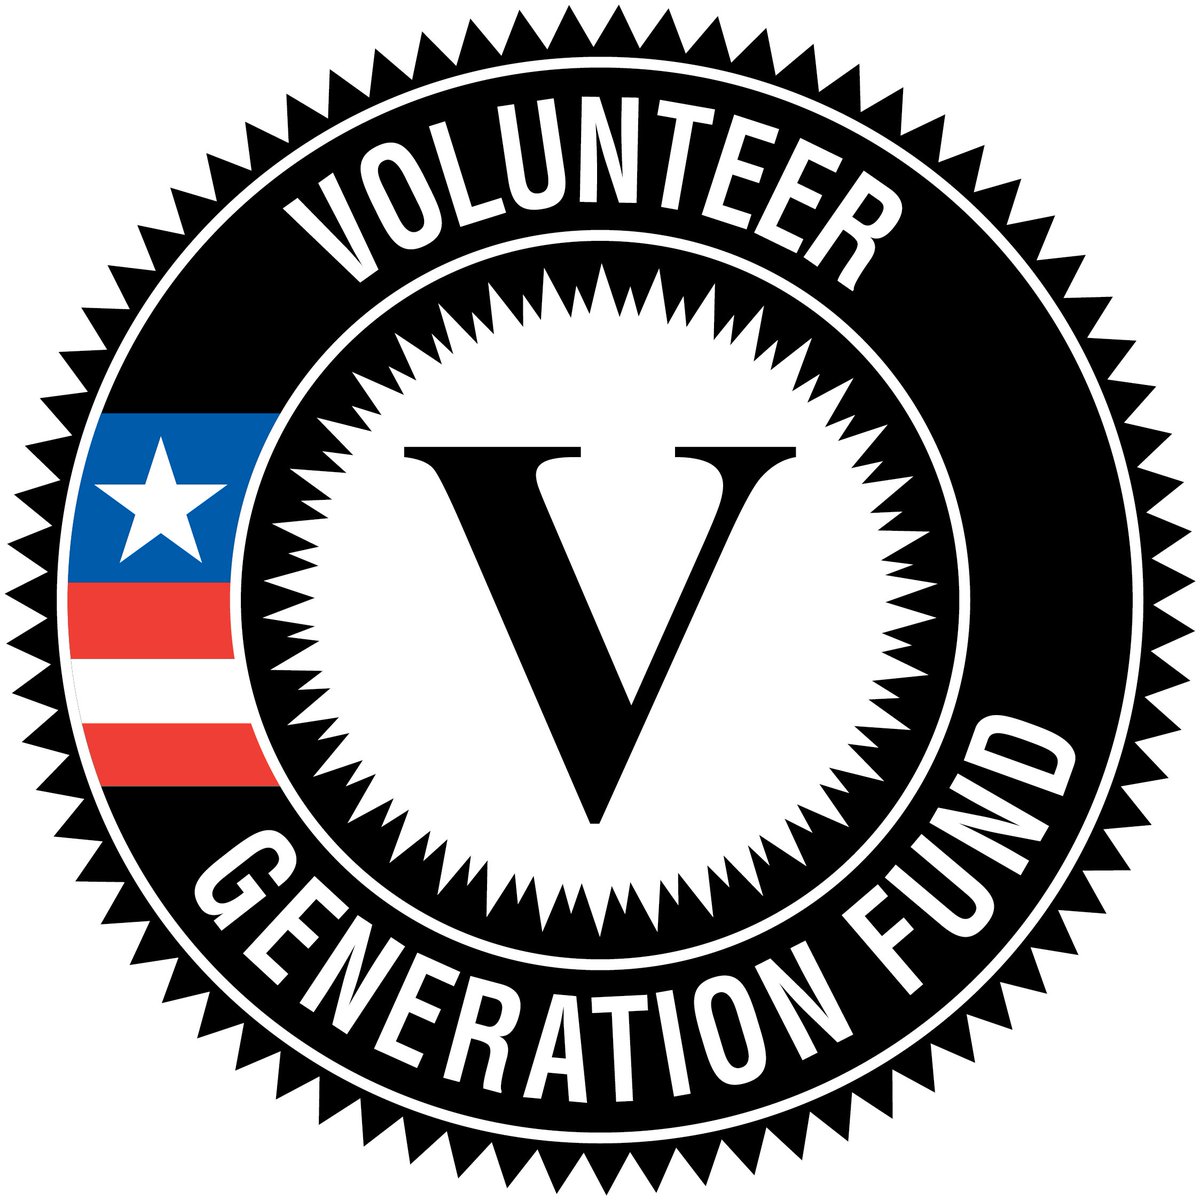 Today is VGF Day! NJVOAD is proud to be partnered with the NJ Commission on National & Community Service's Volunteer Generation Fund! #NVW #VolunteerGeneration #VolunteerNJ #VGFNJ #VGFStong  #VGFRepresent #JerseyStrongIAmAVolunteer @statecommission @AmeriCorps @PointsofLight